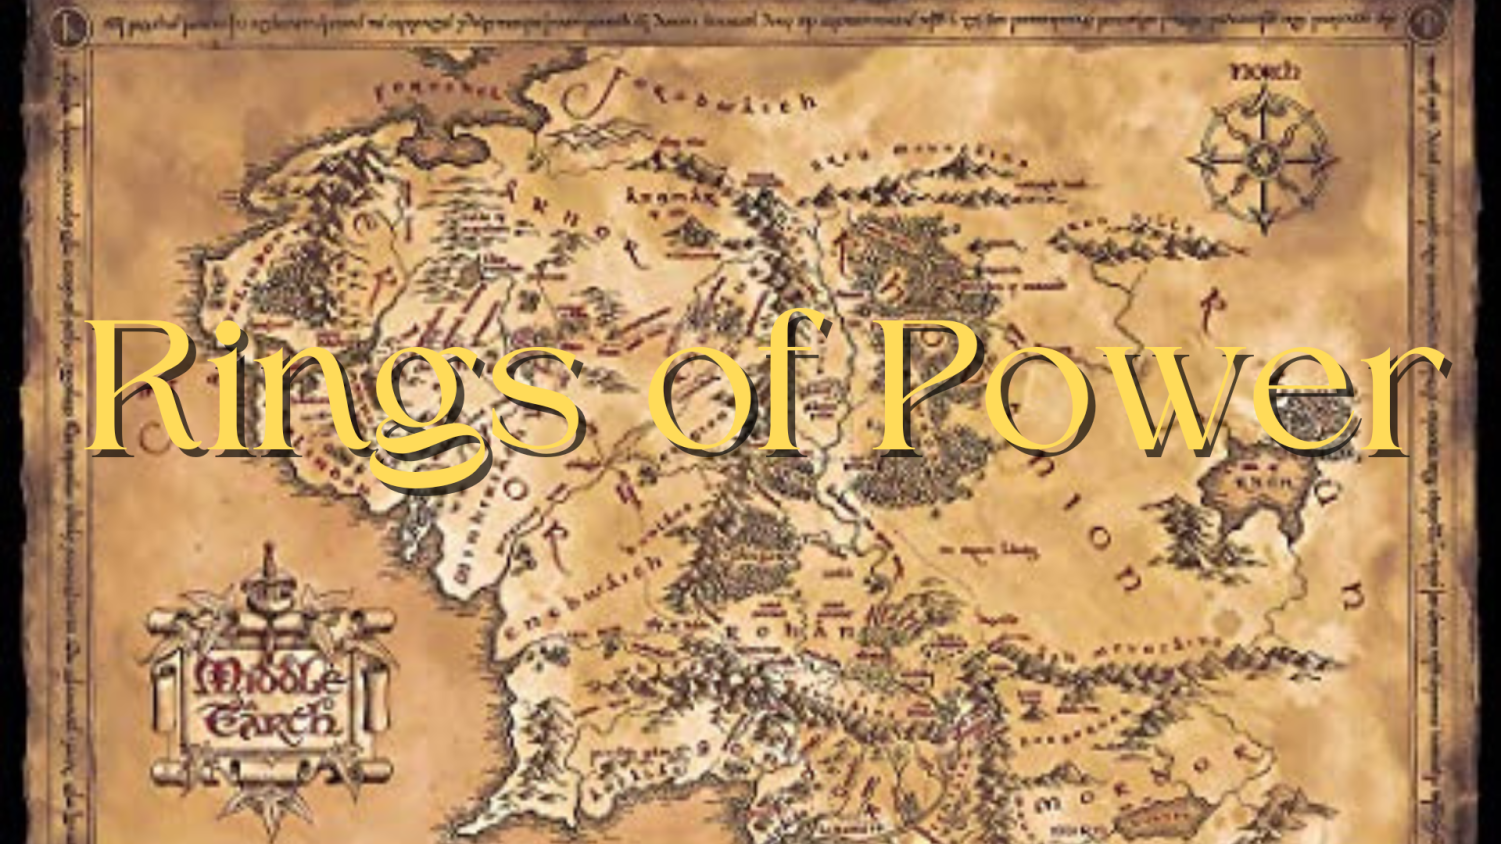 Mapping Out 'The Rings of Power' Seasons 3-5